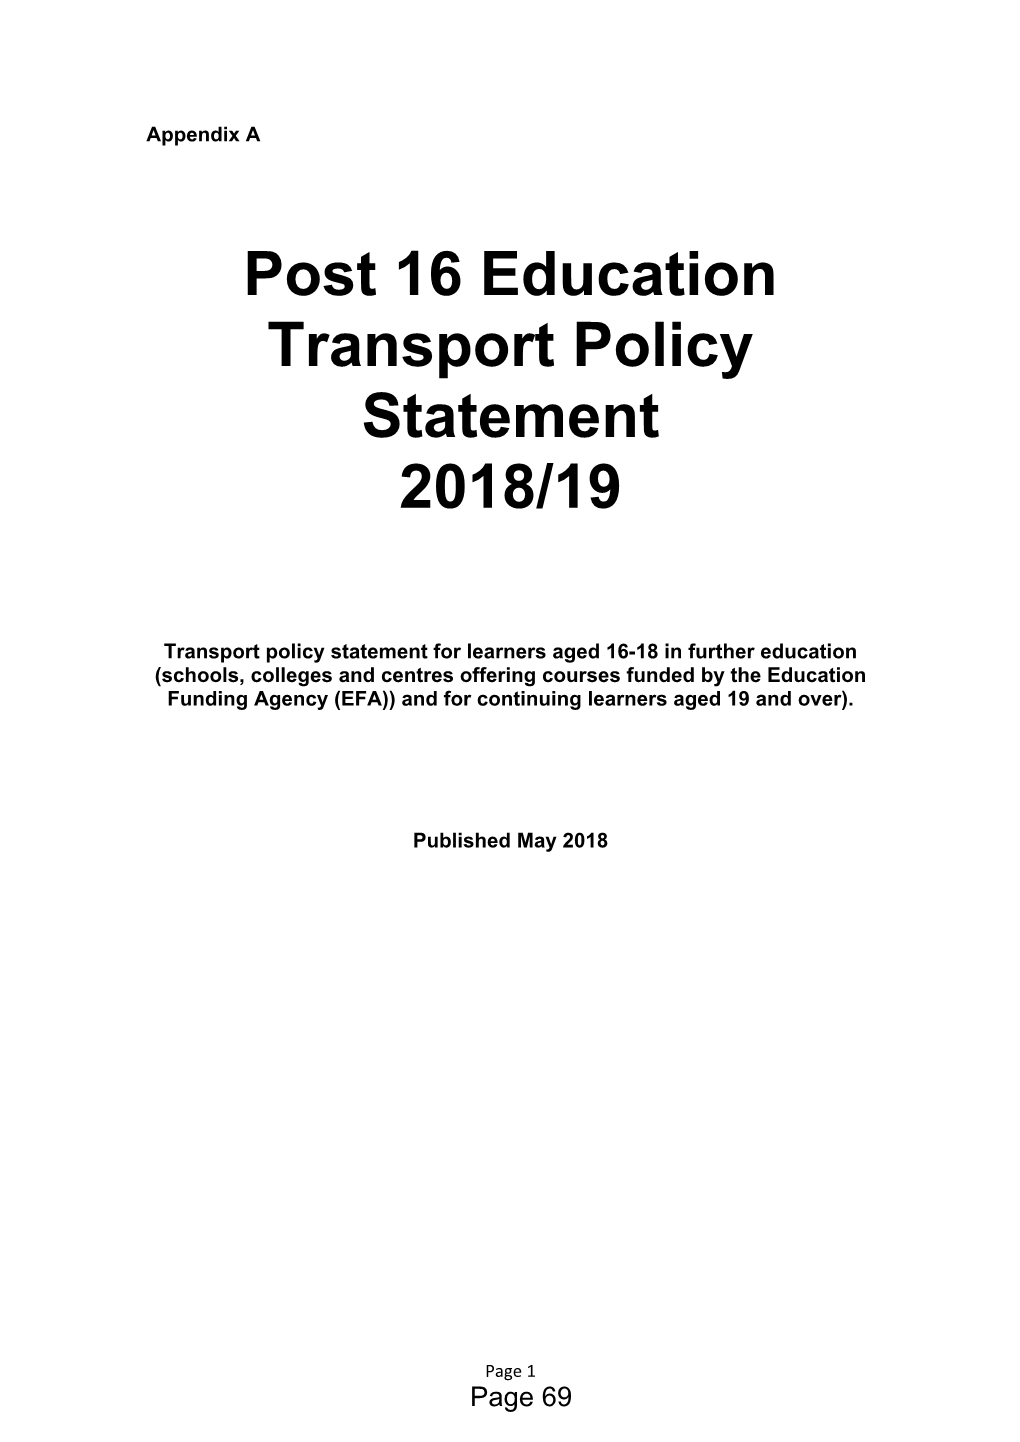 Post 16 Education Transport Policy Statement 2018/19